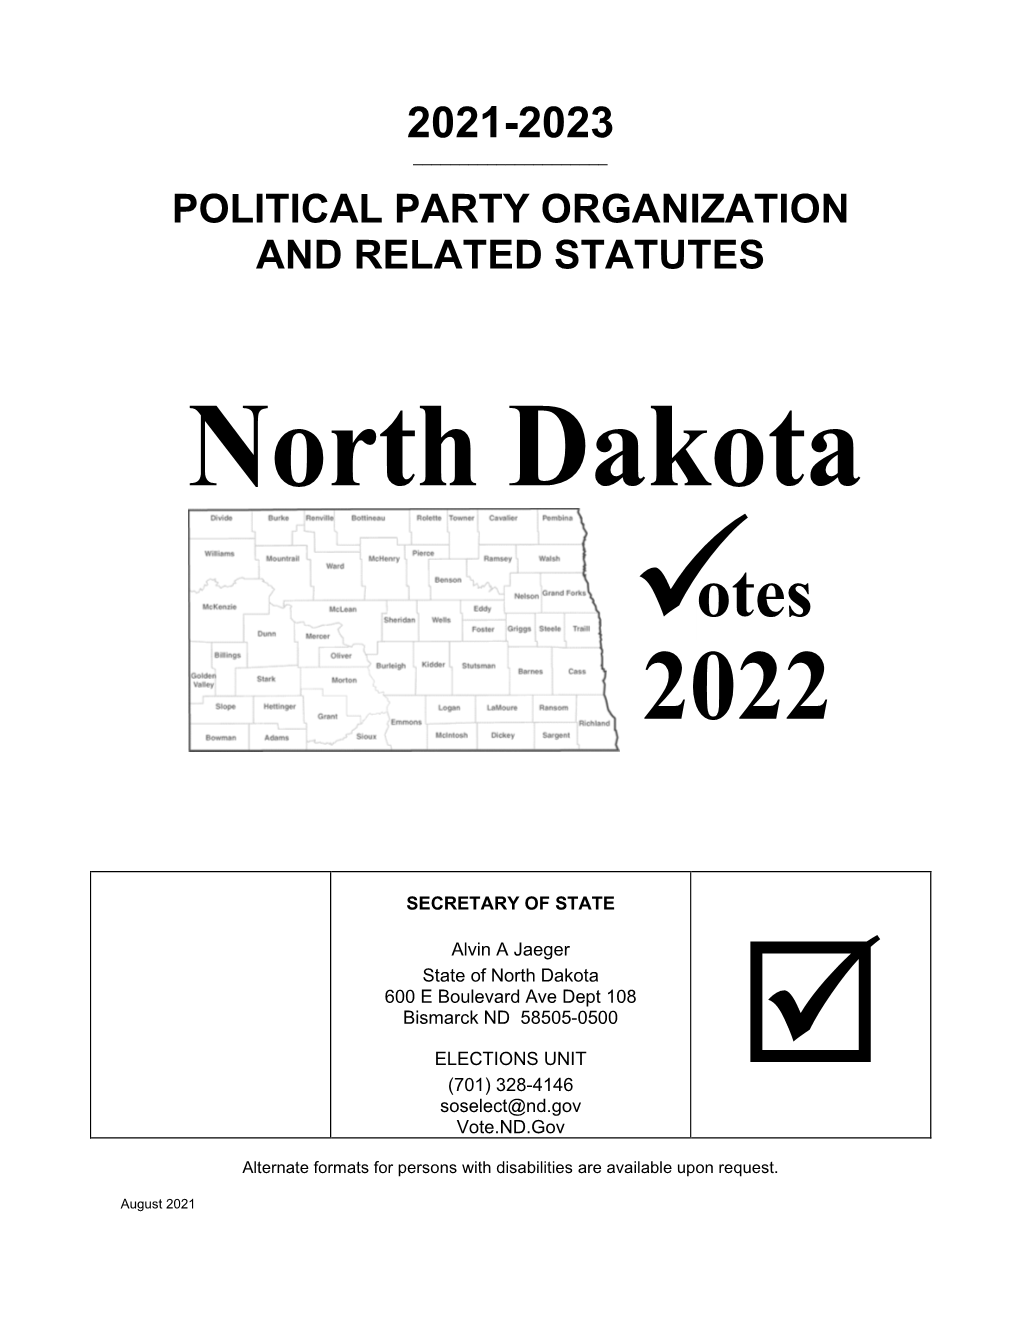 Political Party Organization and Related Statutes